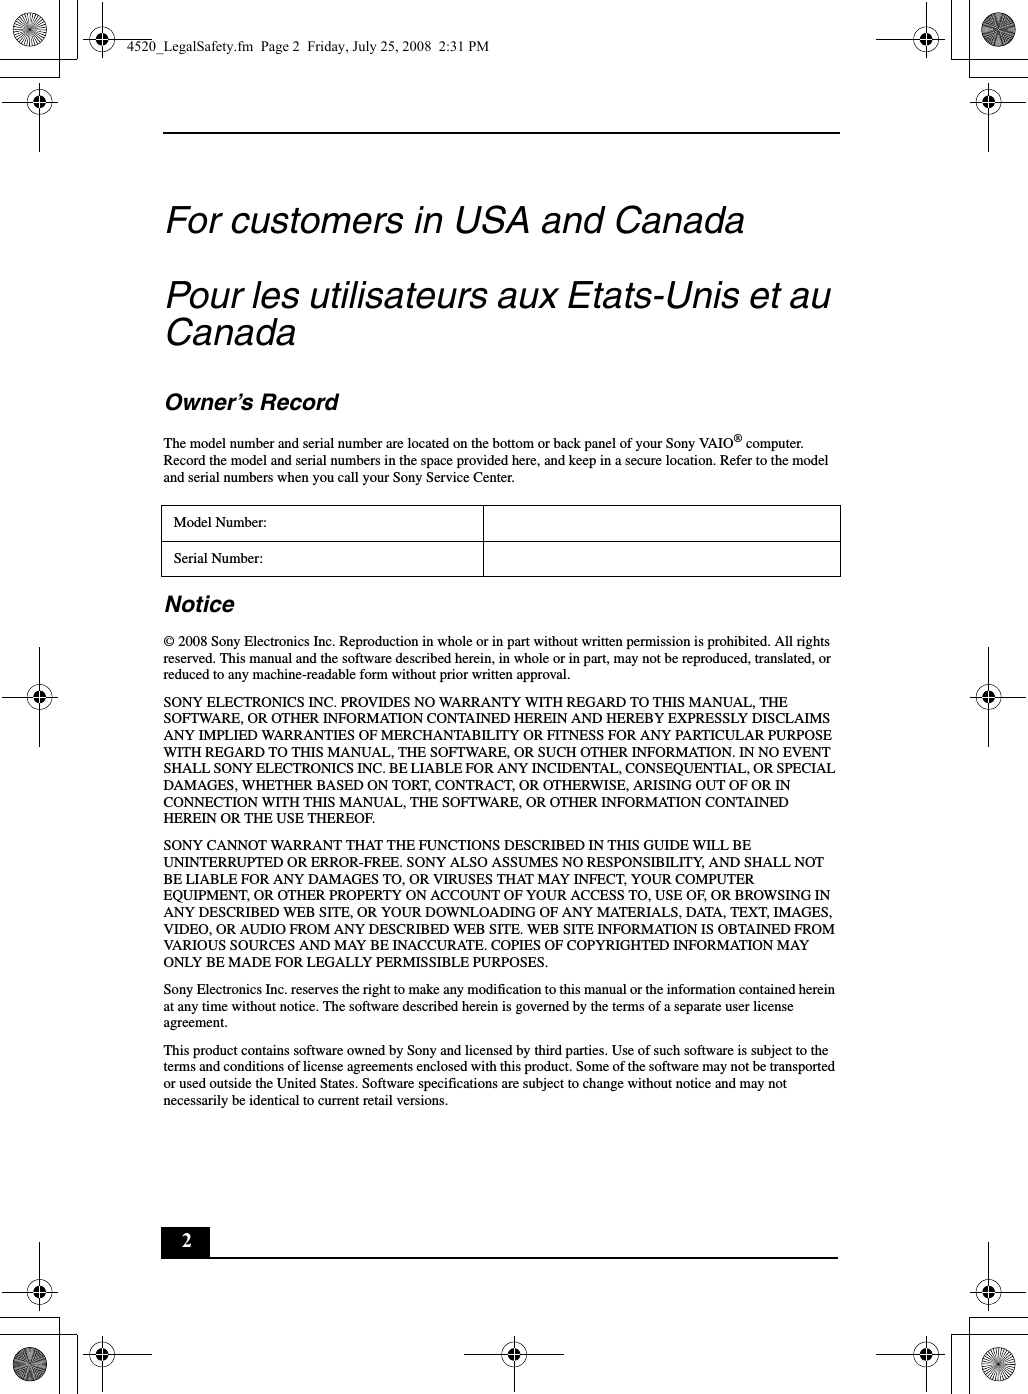 2For customers in USA and CanadaPour les utilisateurs aux Etats-Unis et au CanadaOwner’s RecordThe model number and serial number are located on the bottom or back panel of your Sony VAIO® computer. Record the model and serial numbers in the space provided here, and keep in a secure location. Refer to the model and serial numbers when you call your Sony Service Center.Notice© 2008 Sony Electronics Inc. Reproduction in whole or in part without written permission is prohibited. All rights reserved. This manual and the software described herein, in whole or in part, may not be reproduced, translated, or reduced to any machine-readable form without prior written approval.SONY ELECTRONICS INC. PROVIDES NO WARRANTY WITH REGARD TO THIS MANUAL, THE SOFTWARE, OR OTHER INFORMATION CONTAINED HEREIN AND HEREBY EXPRESSLY DISCLAIMS ANY IMPLIED WARRANTIES OF MERCHANTABILITY OR FITNESS FOR ANY PARTICULAR PURPOSE WITH REGARD TO THIS MANUAL, THE SOFTWARE, OR SUCH OTHER INFORMATION. IN NO EVENT SHALL SONY ELECTRONICS INC. BE LIABLE FOR ANY INCIDENTAL, CONSEQUENTIAL, OR SPECIAL DAMAGES, WHETHER BASED ON TORT, CONTRACT, OR OTHERWISE, ARISING OUT OF OR IN CONNECTION WITH THIS MANUAL, THE SOFTWARE, OR OTHER INFORMATION CONTAINED HEREIN OR THE USE THEREOF.SONY CANNOT WARRANT THAT THE FUNCTIONS DESCRIBED IN THIS GUIDE WILL BE UNINTERRUPTED OR ERROR-FREE. SONY ALSO ASSUMES NO RESPONSIBILITY, AND SHALL NOT BE LIABLE FOR ANY DAMAGES TO, OR VIRUSES THAT MAY INFECT, YOUR COMPUTER EQUIPMENT, OR OTHER PROPERTY ON ACCOUNT OF YOUR ACCESS TO, USE OF, OR BROWSING IN ANY DESCRIBED WEB SITE, OR YOUR DOWNLOADING OF ANY MATERIALS, DATA, TEXT, IMAGES, VIDEO, OR AUDIO FROM ANY DESCRIBED WEB SITE. WEB SITE INFORMATION IS OBTAINED FROM VARIOUS SOURCES AND MAY BE INACCURATE. COPIES OF COPYRIGHTED INFORMATION MAY ONLY BE MADE FOR LEGALLY PERMISSIBLE PURPOSES.Sony Electronics Inc. reserves the right to make any modification to this manual or the information contained herein at any time without notice. The software described herein is governed by the terms of a separate user license agreement.This product contains software owned by Sony and licensed by third parties. Use of such software is subject to the terms and conditions of license agreements enclosed with this product. Some of the software may not be transported or used outside the United States. Software specifications are subject to change without notice and may not necessarily be identical to current retail versions.Model Number:Serial Number:4520_LegalSafety.fm  Page 2  Friday, July 25, 2008  2:31 PM